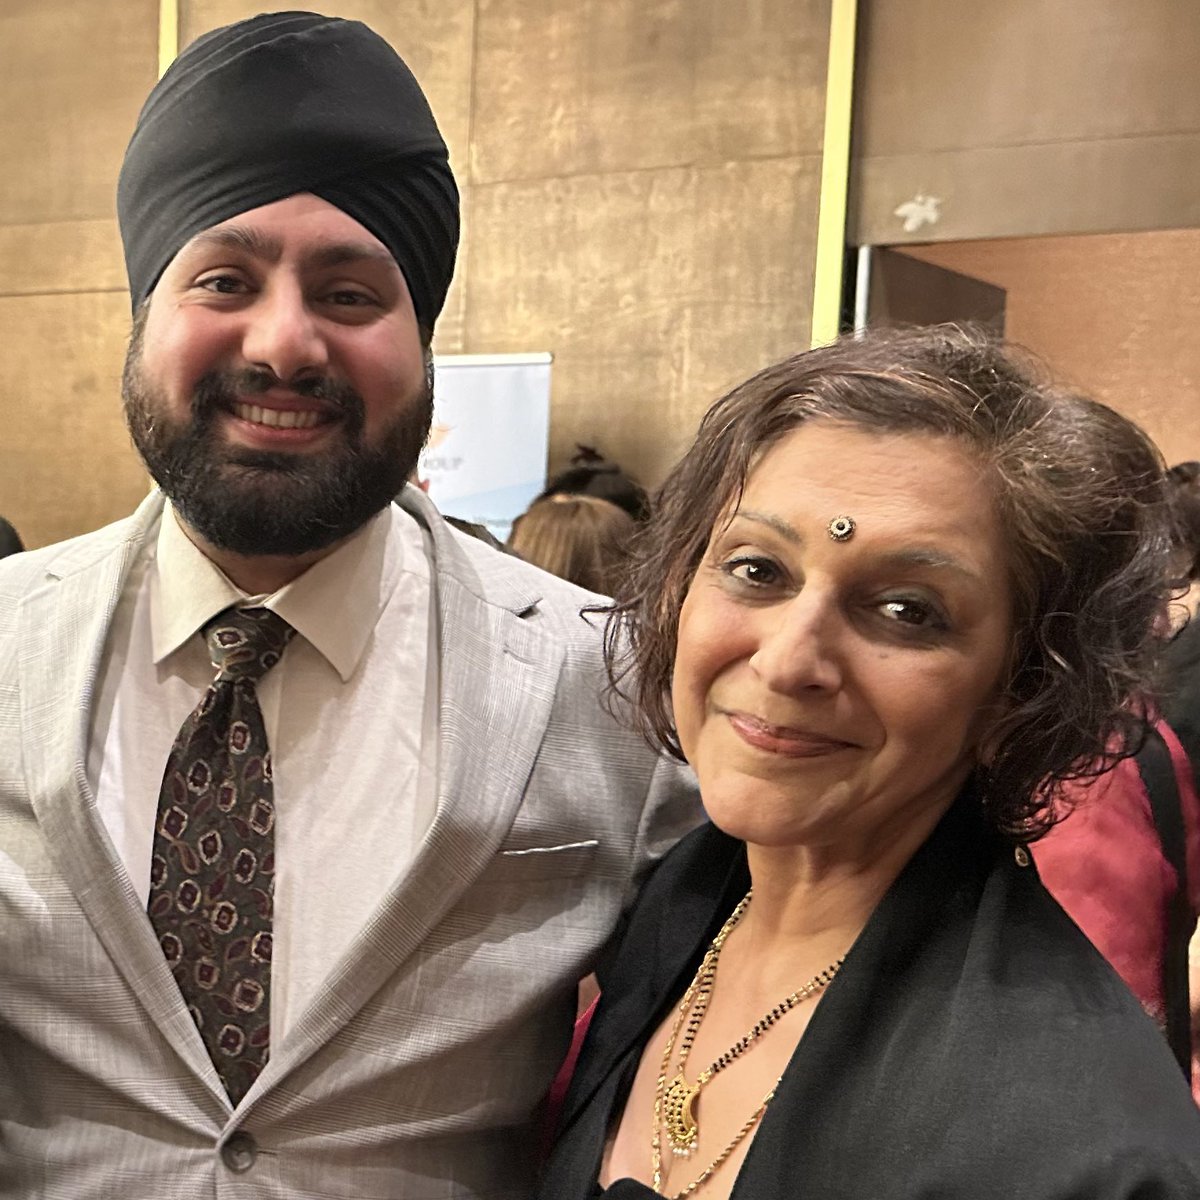 It’s not often you get to meet the people you grew up watching on screen. So happy to meet and talk briefly with the legendary and inspirational @MeeraSyal at the @EEACTA last night. Thank you Meera, for your words of wisdom and a massive congratulations on the award! 🙌🏽